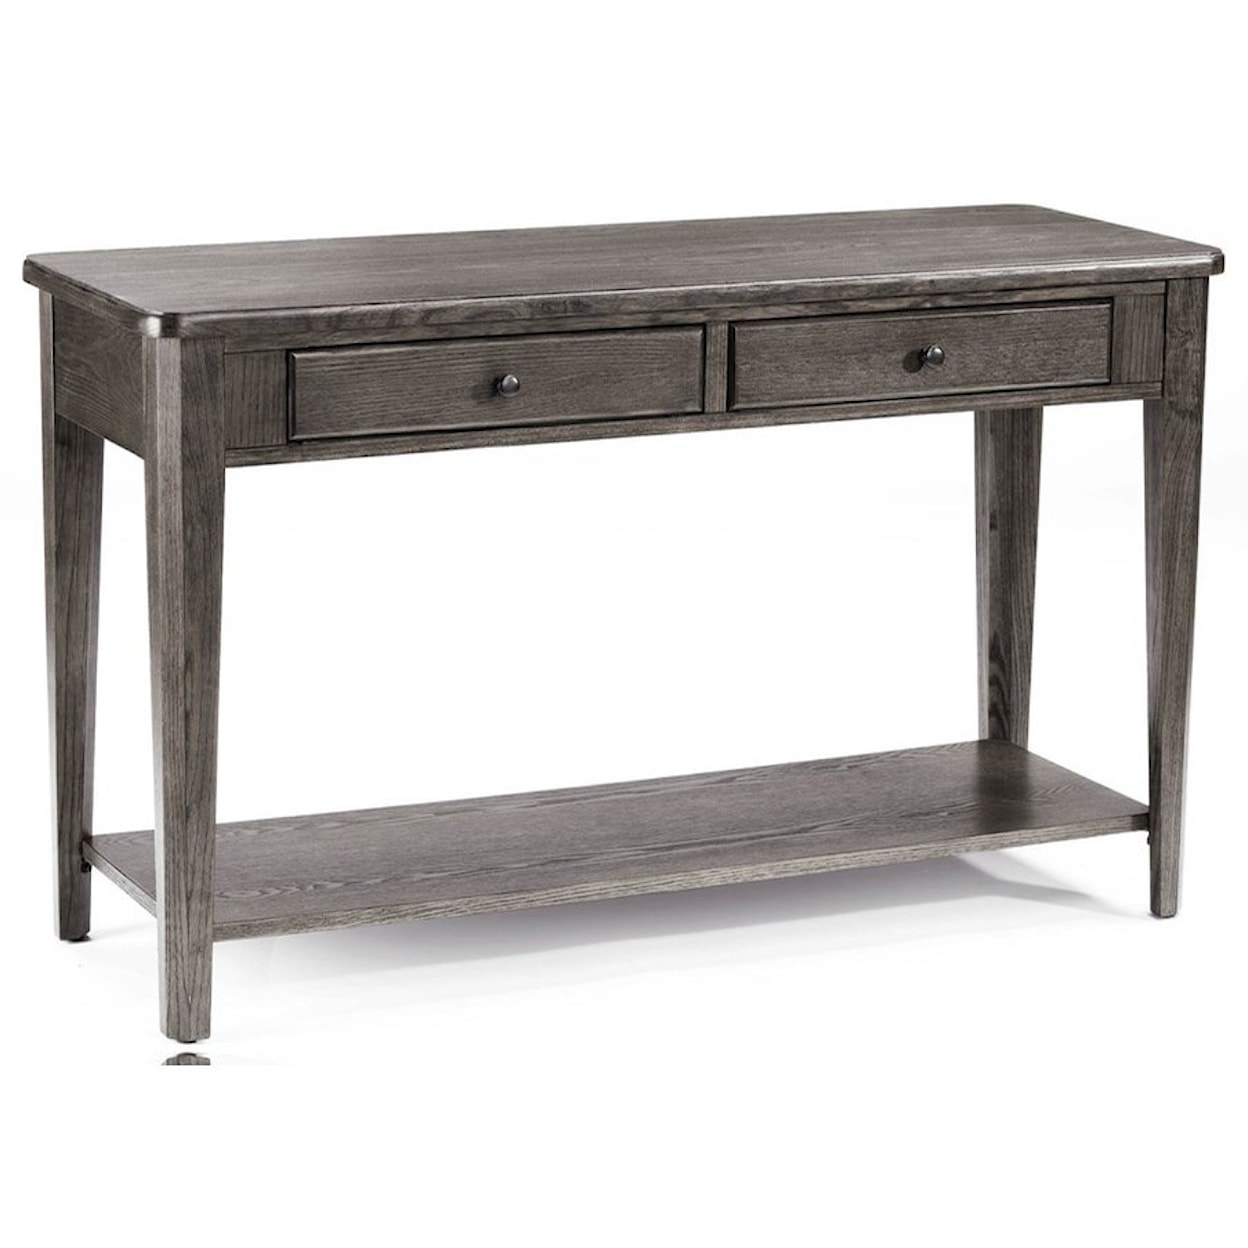 Peters Revington Holden Sofa Table